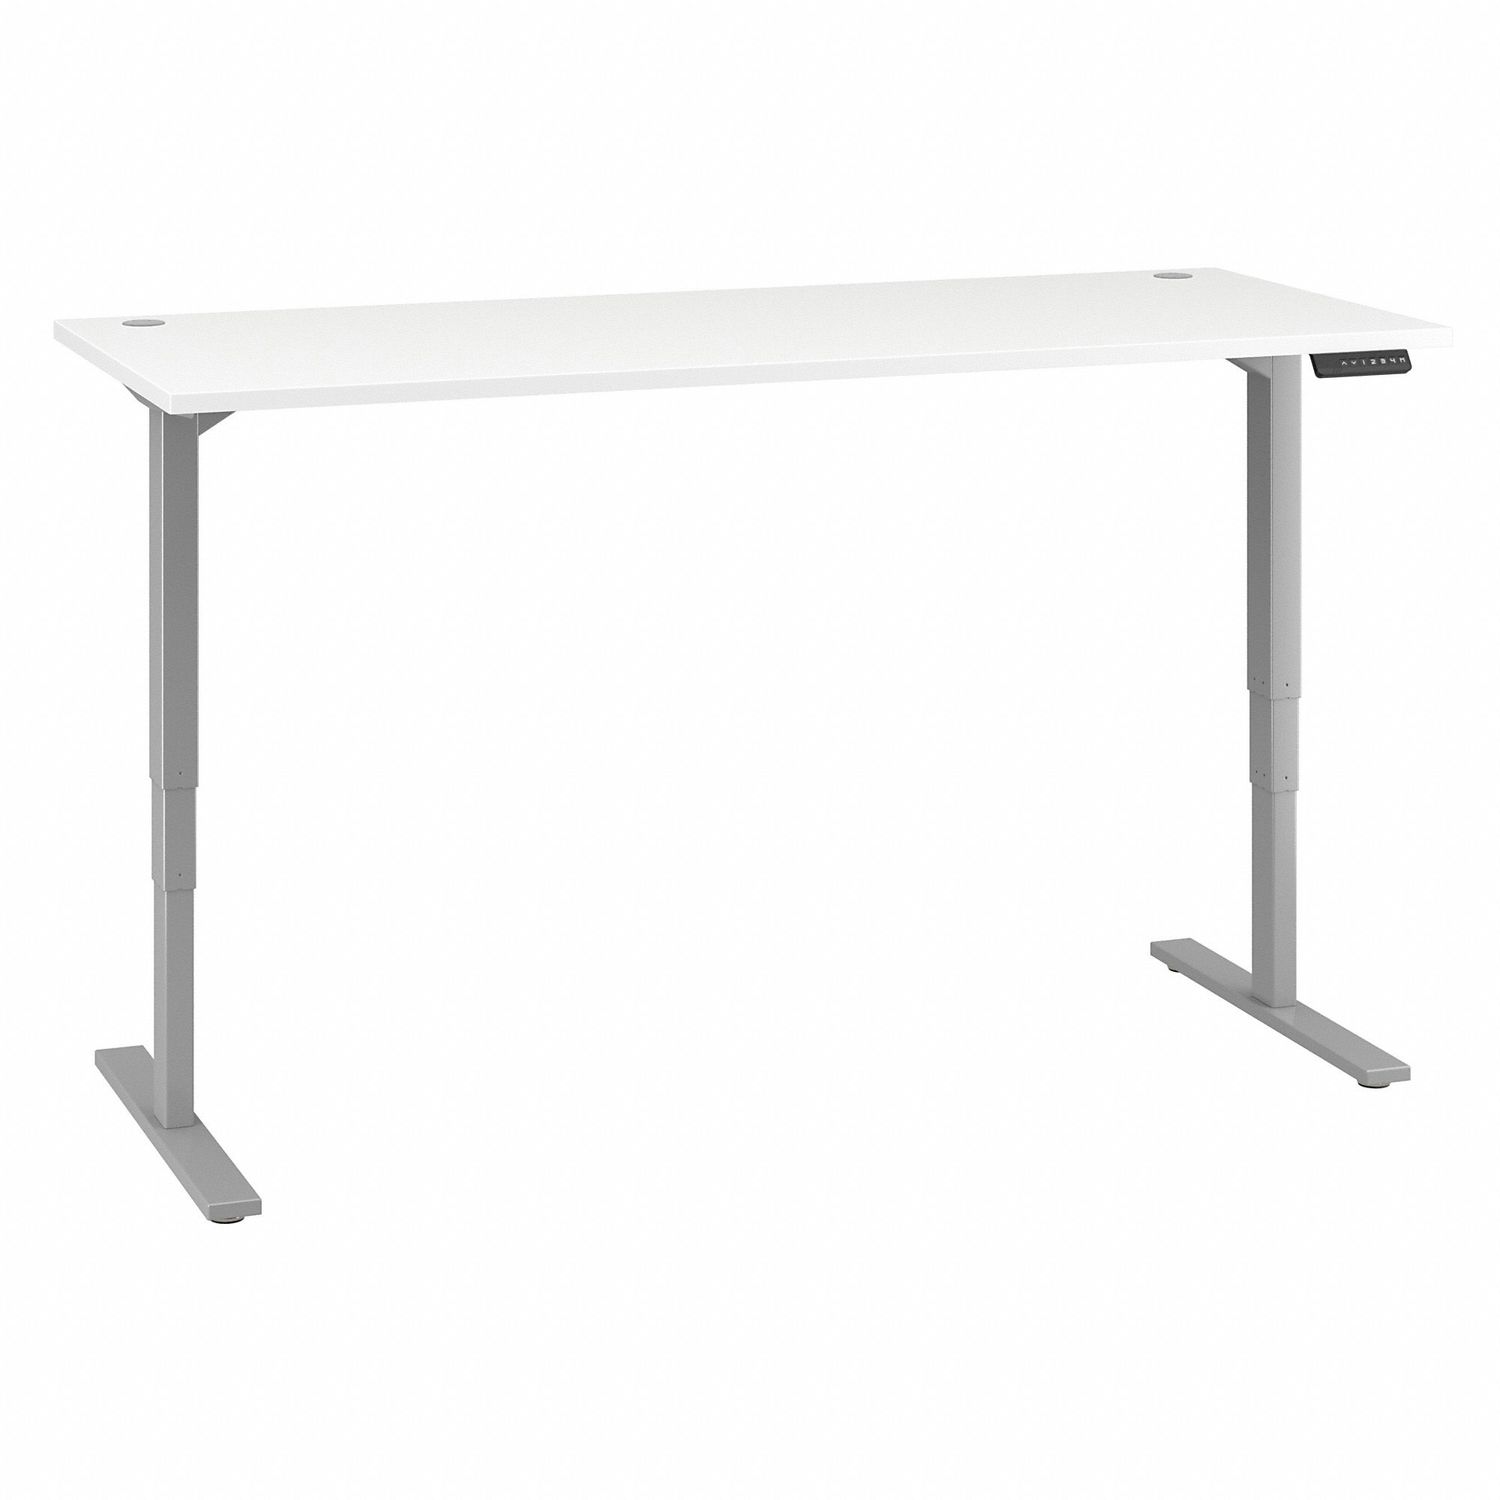 72W x 30D Height Adjustable Standing Desk in White Thermofused Laminate (TFL) Rectangle Top, Gray T-shaped Base, 2 Legs, 71.02" Table Top Width x 29.37" Table Top Depth, 49" Height, Assembly Required